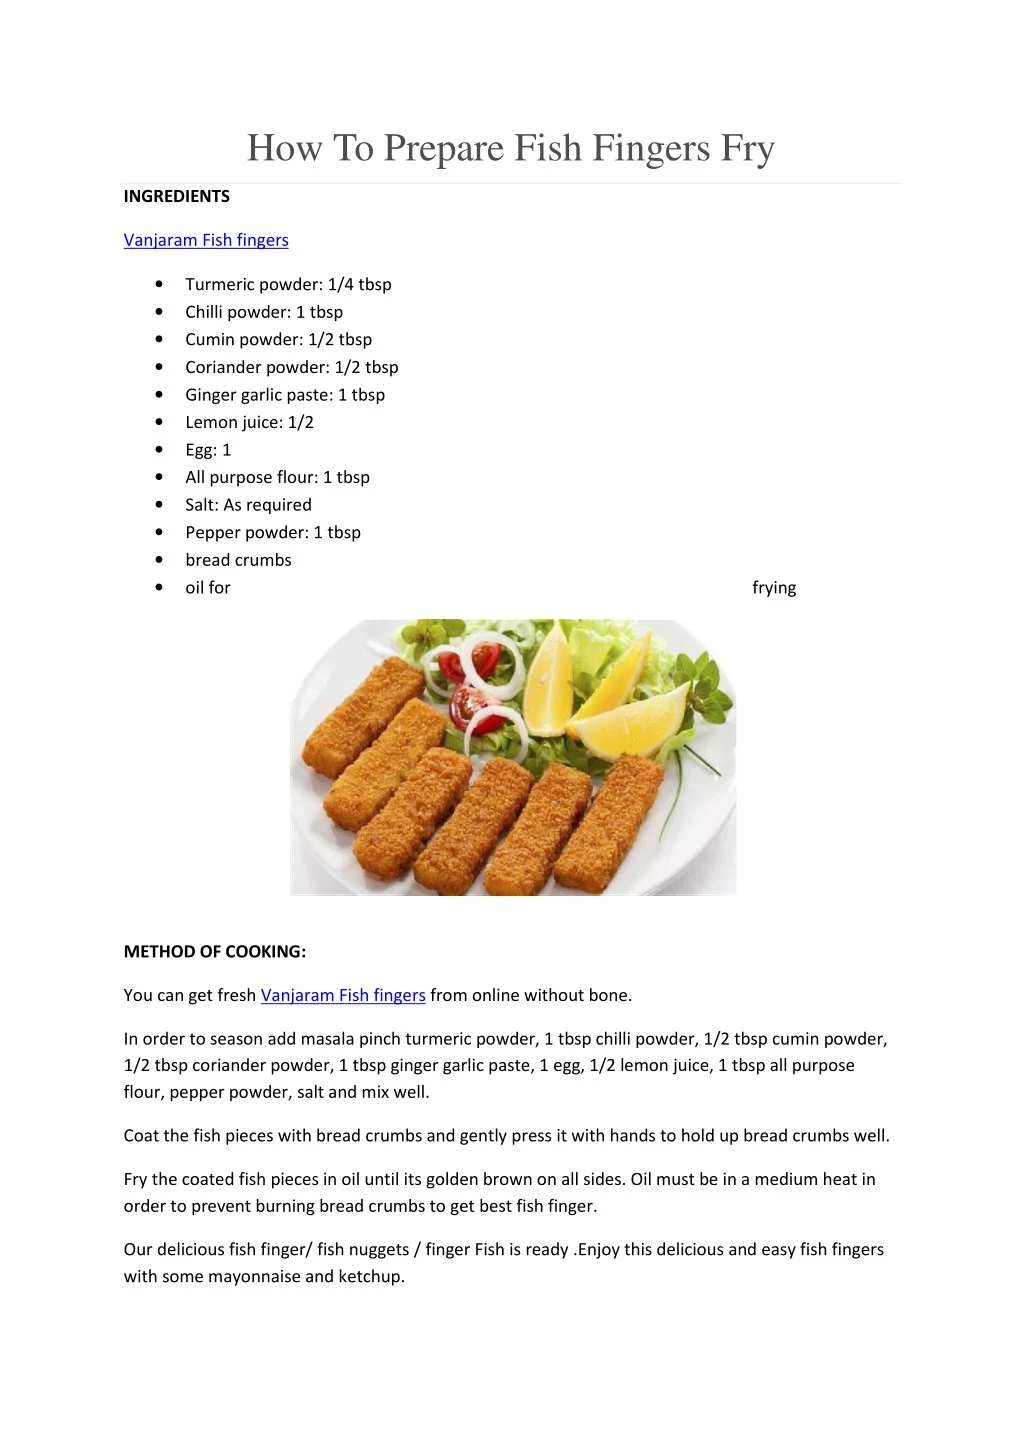 how to prepare fish fingers fry